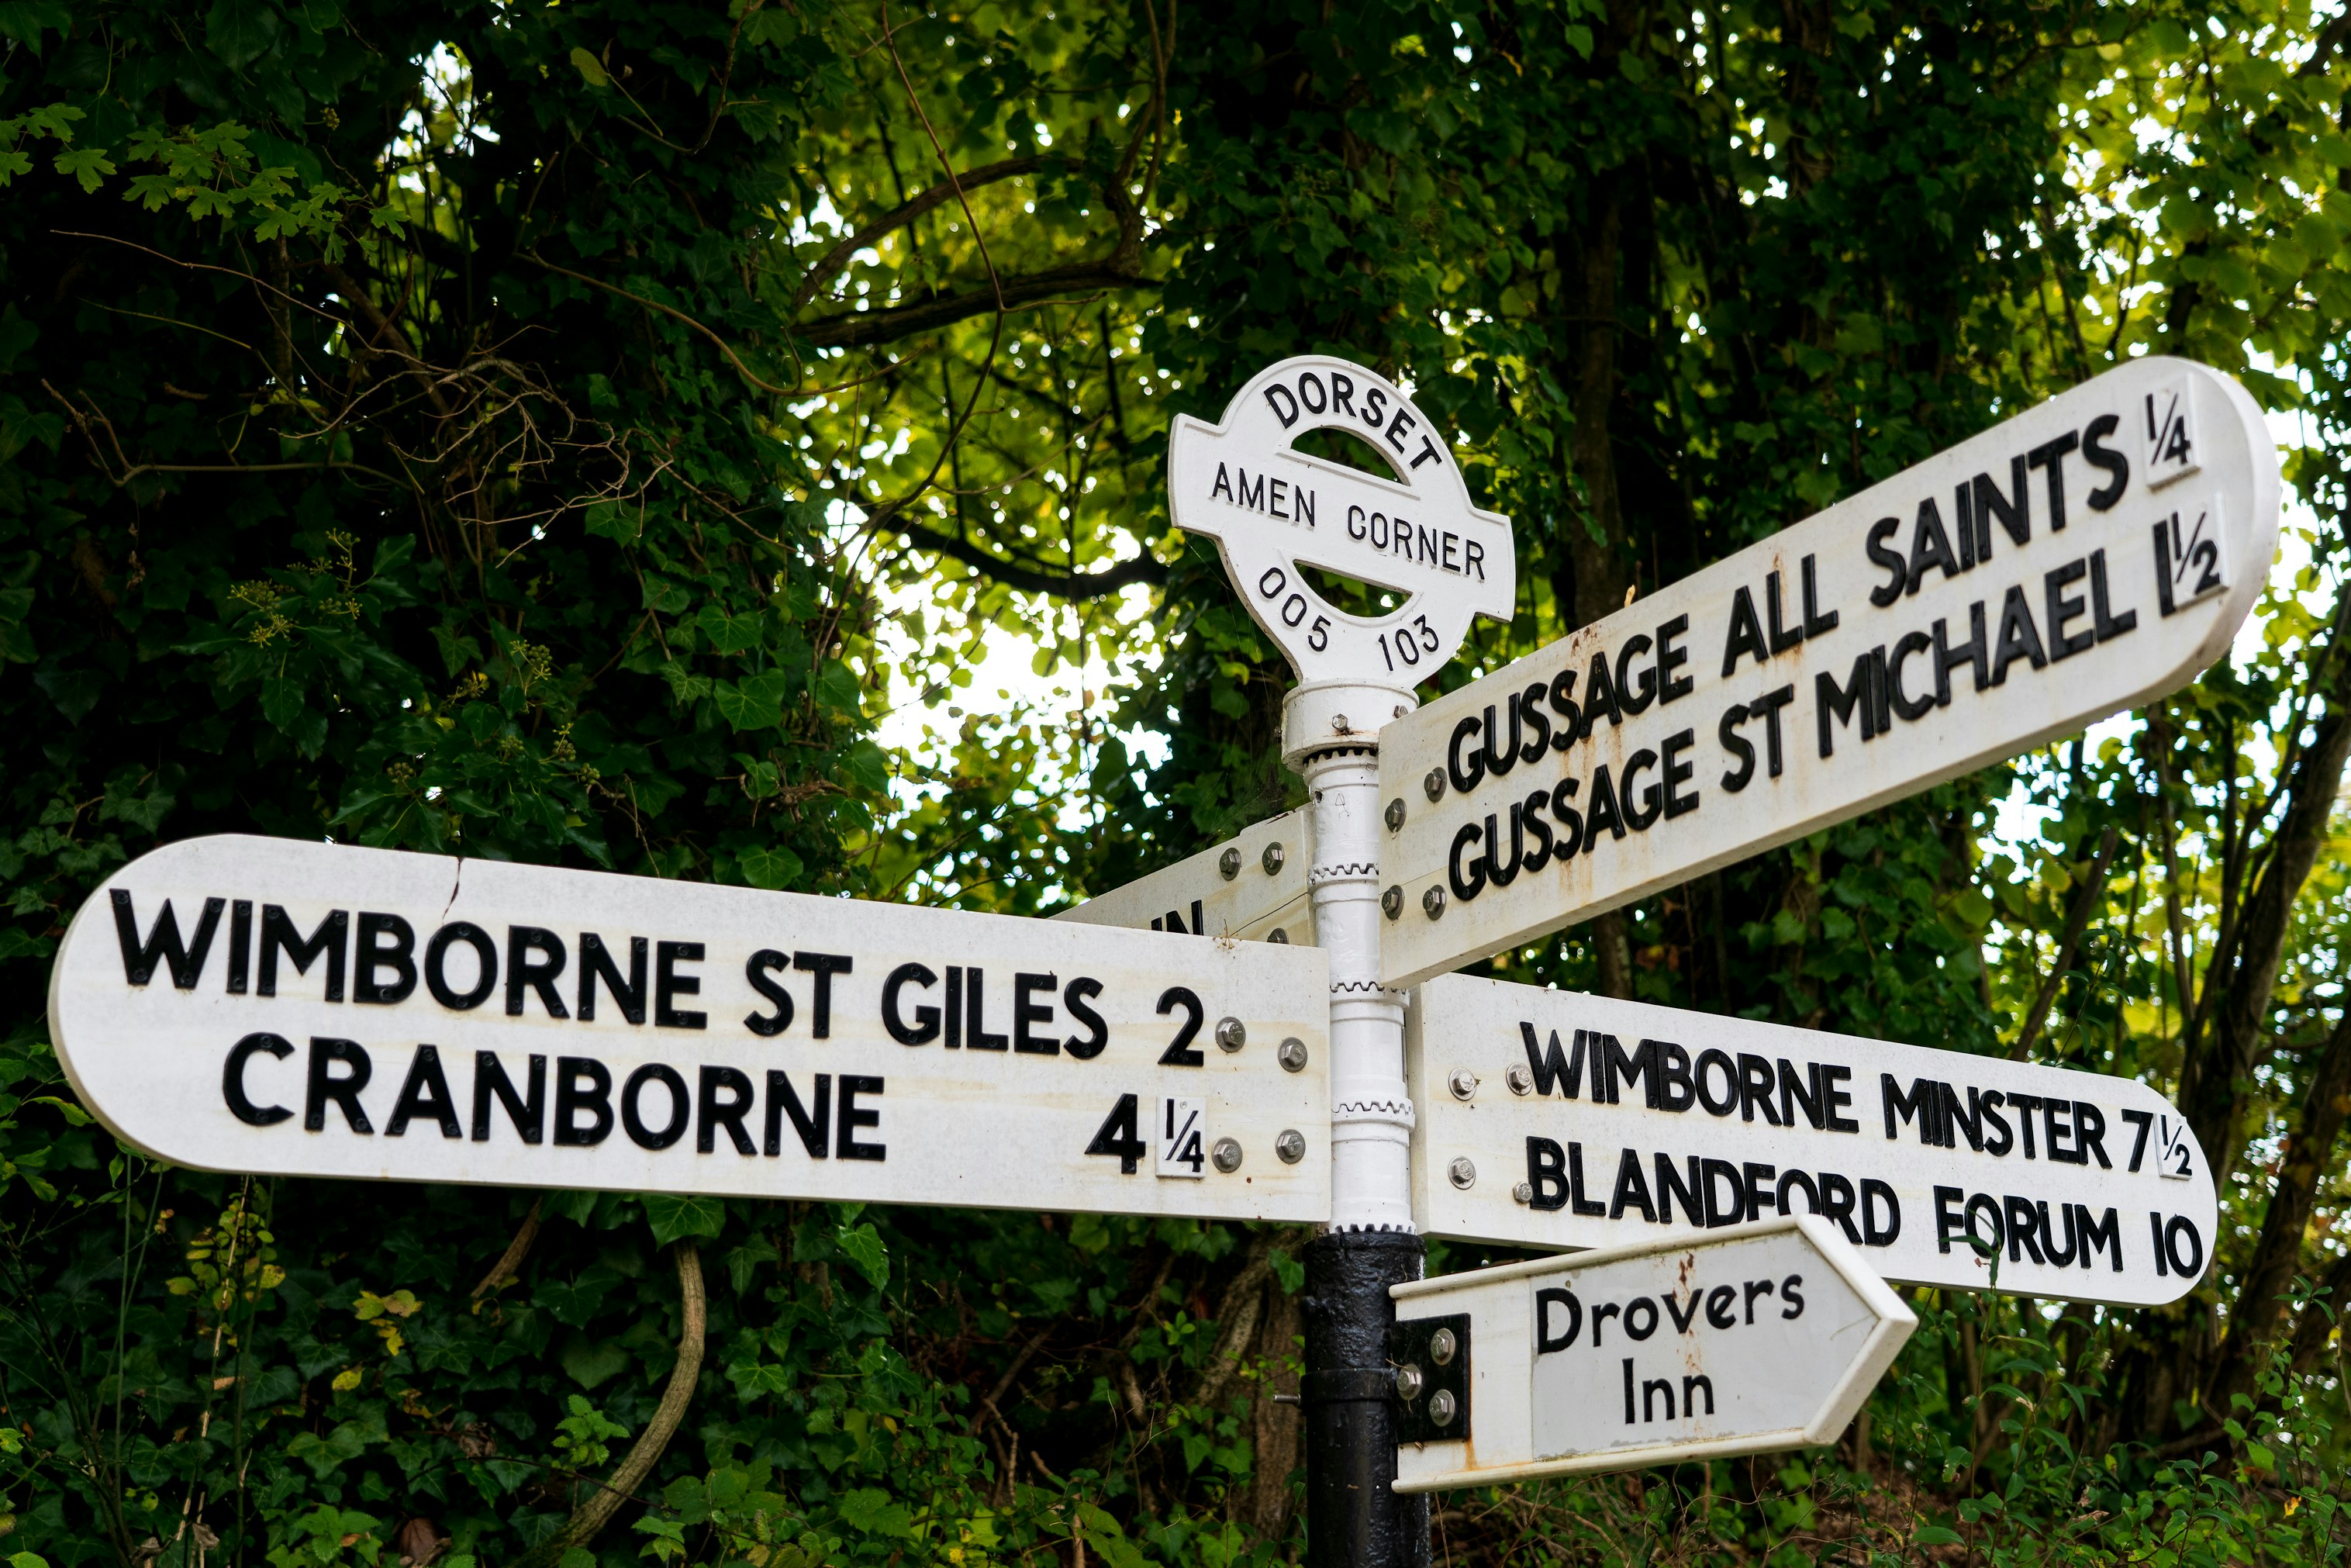 Amen Corner, one of the many fingerposts in the Dorset countryside.